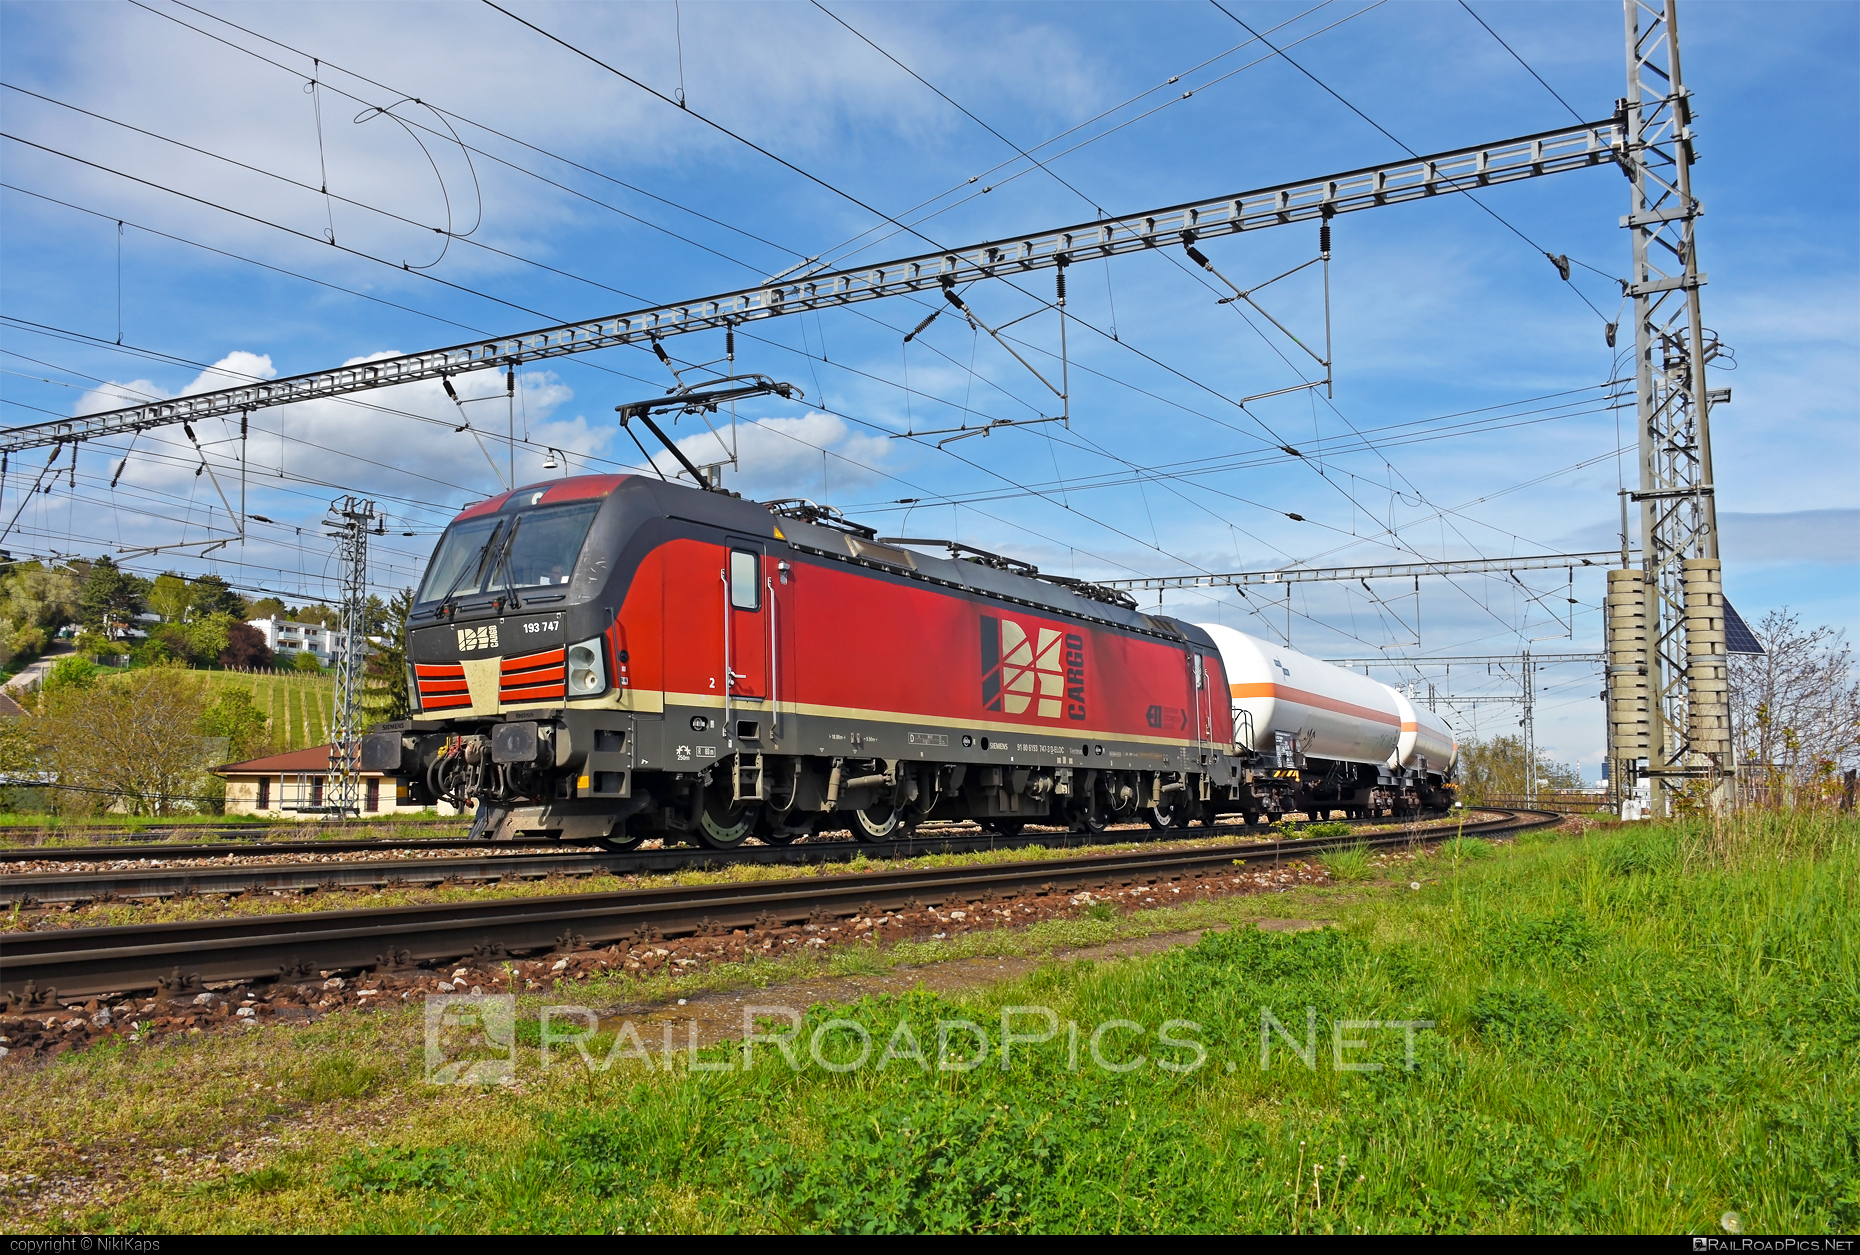 Siemens Vectron MS - 193 747 operated by IDS CARGO a. s. #ell #ellgermany #eloc #europeanlocomotiveleasing #idsc #idscargo #kesselwagen #siemens #siemensVectron #siemensVectronMS #tankwagon #vectron #vectronMS